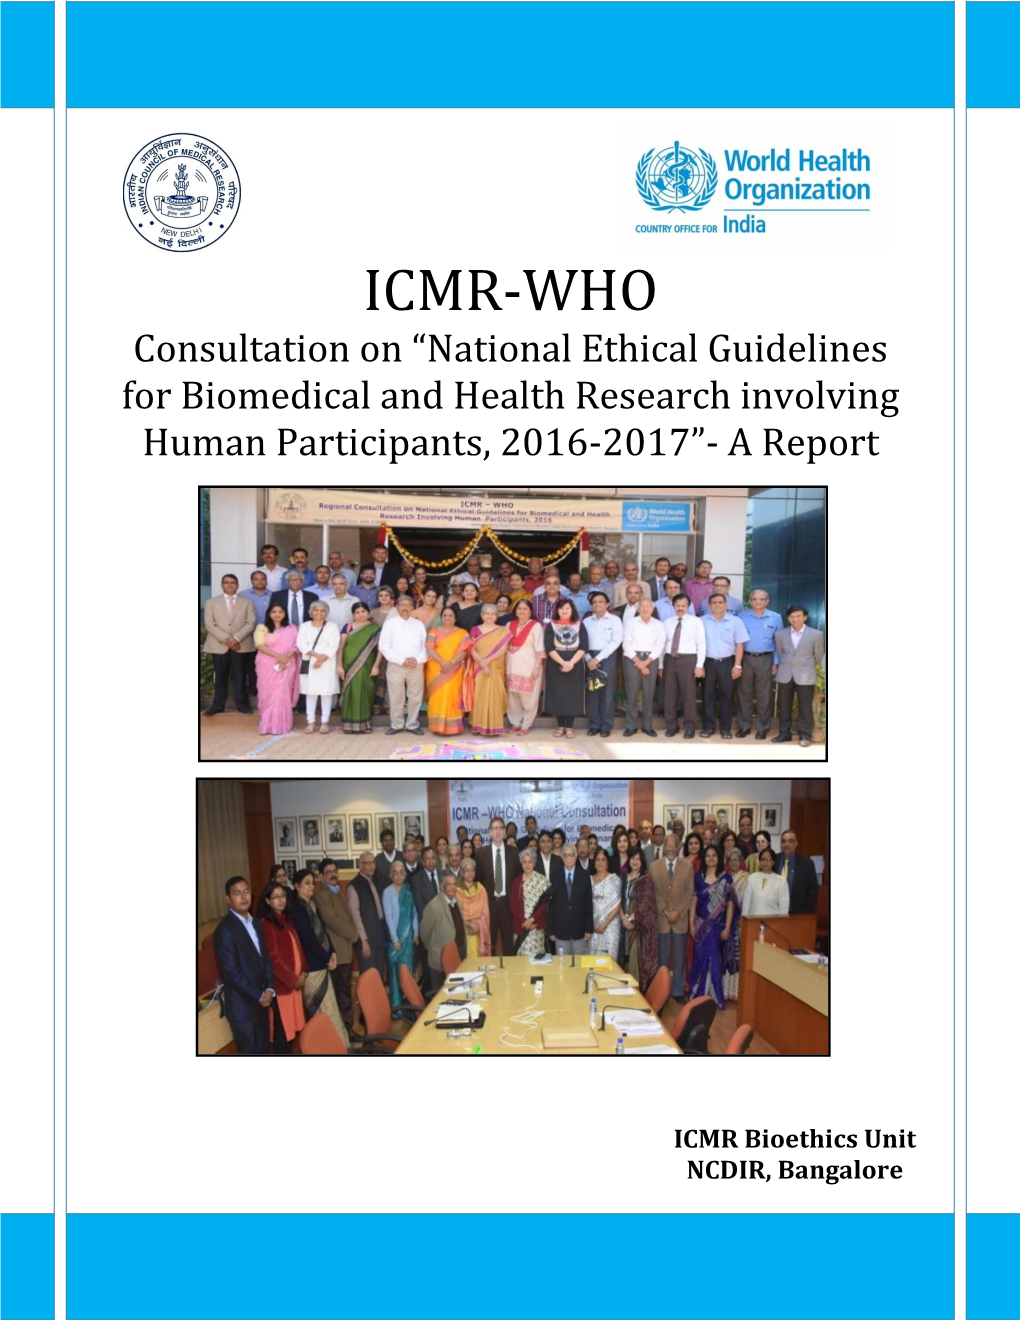 ICMR-WHO Consultation on “National Ethical Guidelines for Biomedical and Health Research Involving Human Participants, 2016-2017”- a Report